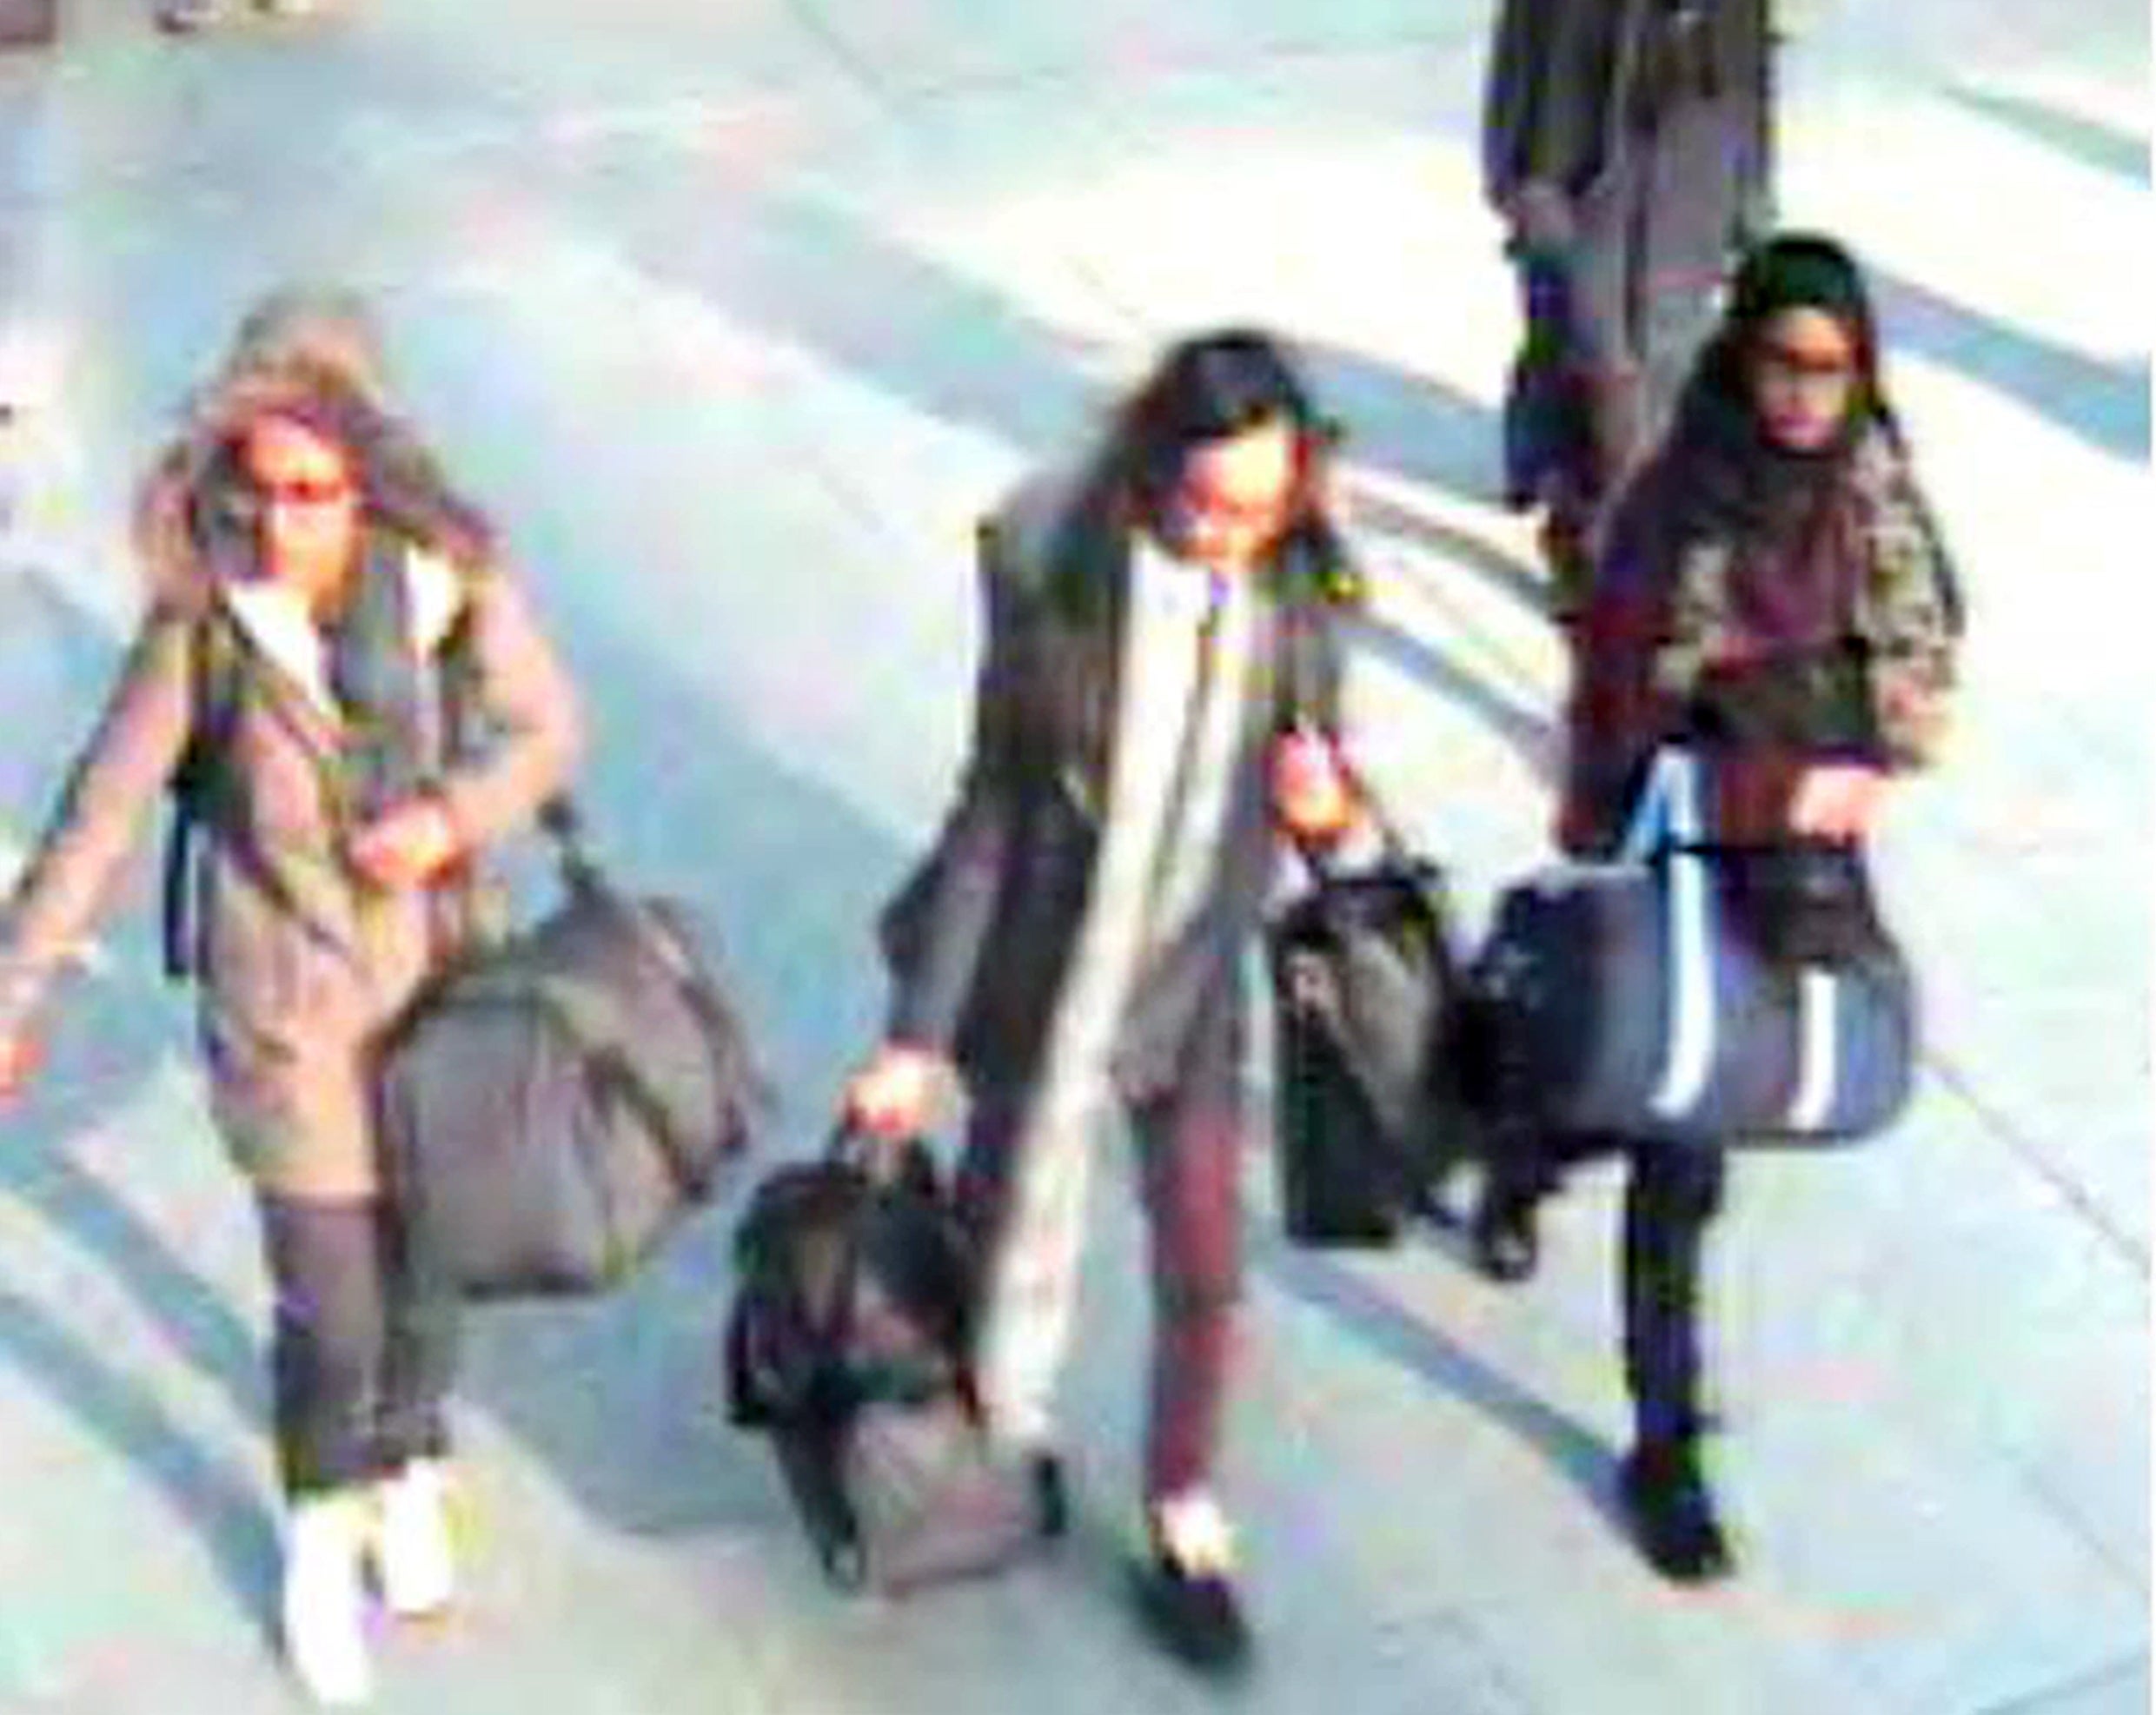 15-year-old Amira Abase, Kadiza Sultana, 16, and Shamima Begum, 15, at Gatwick airport on their way to Syria in February 2015